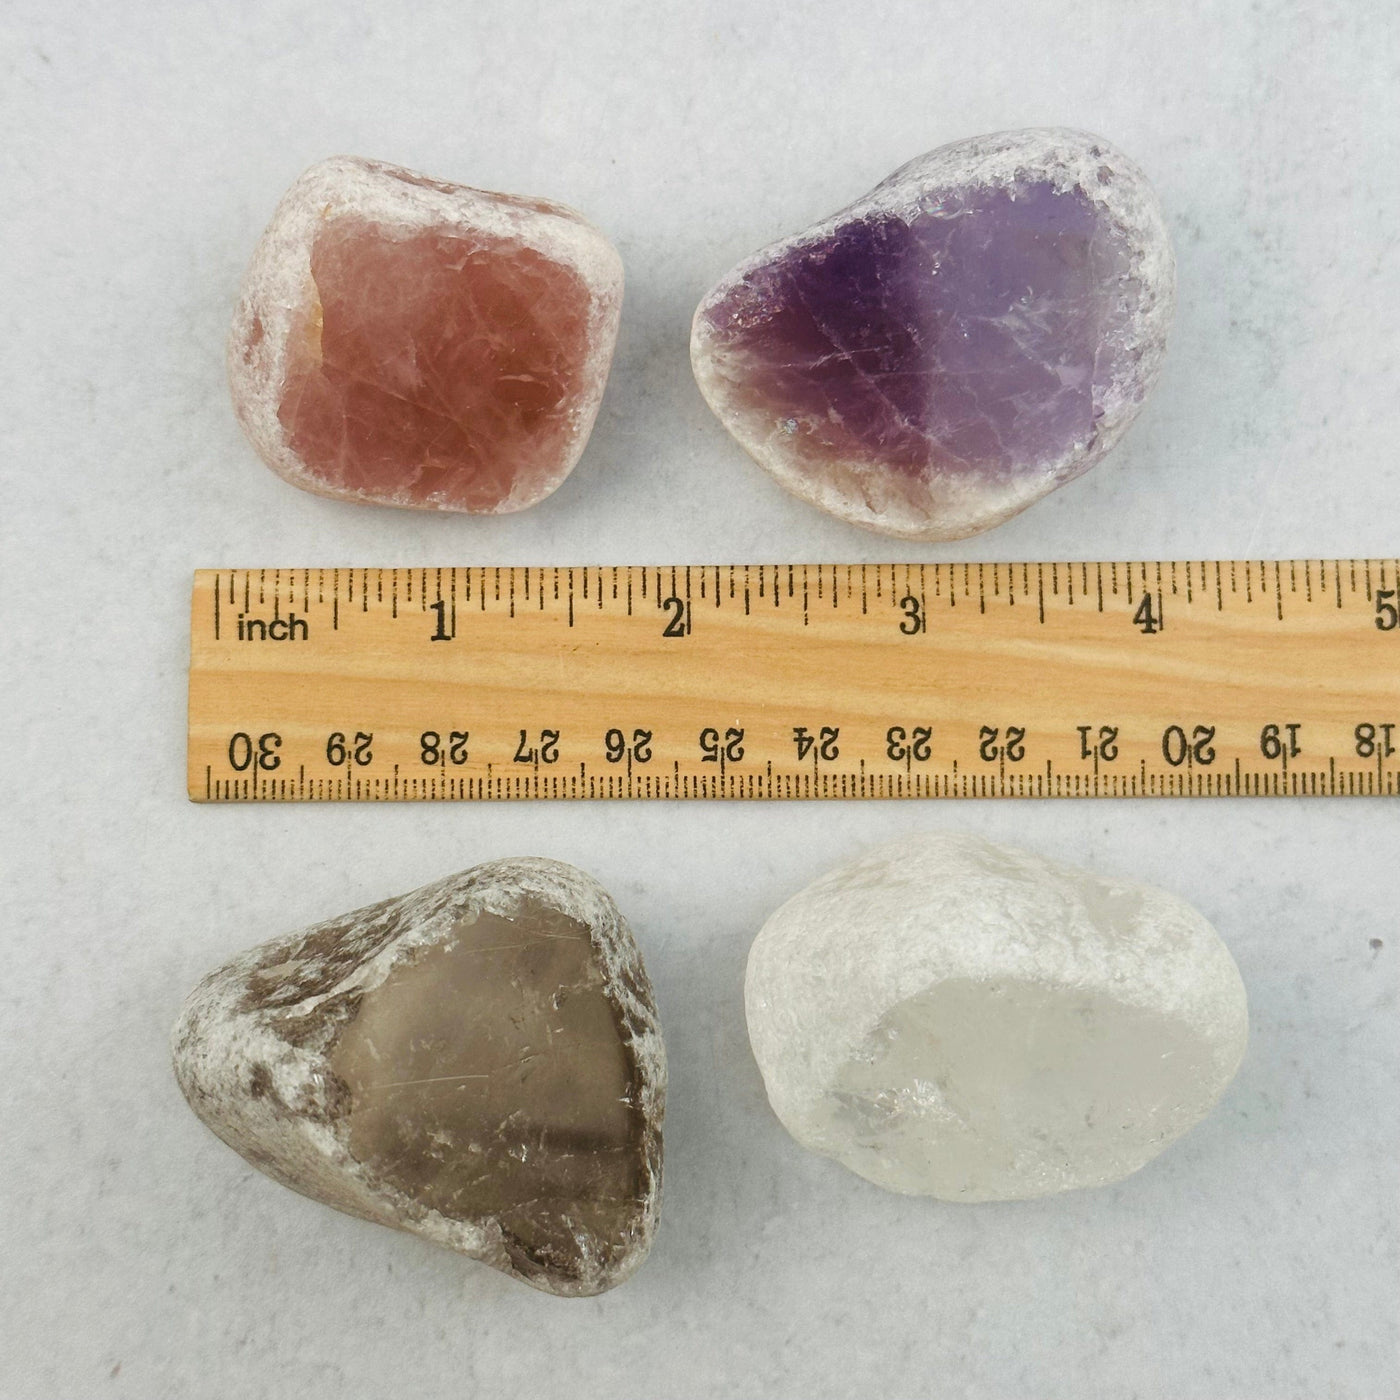 seer stones next to a ruler for size reference 